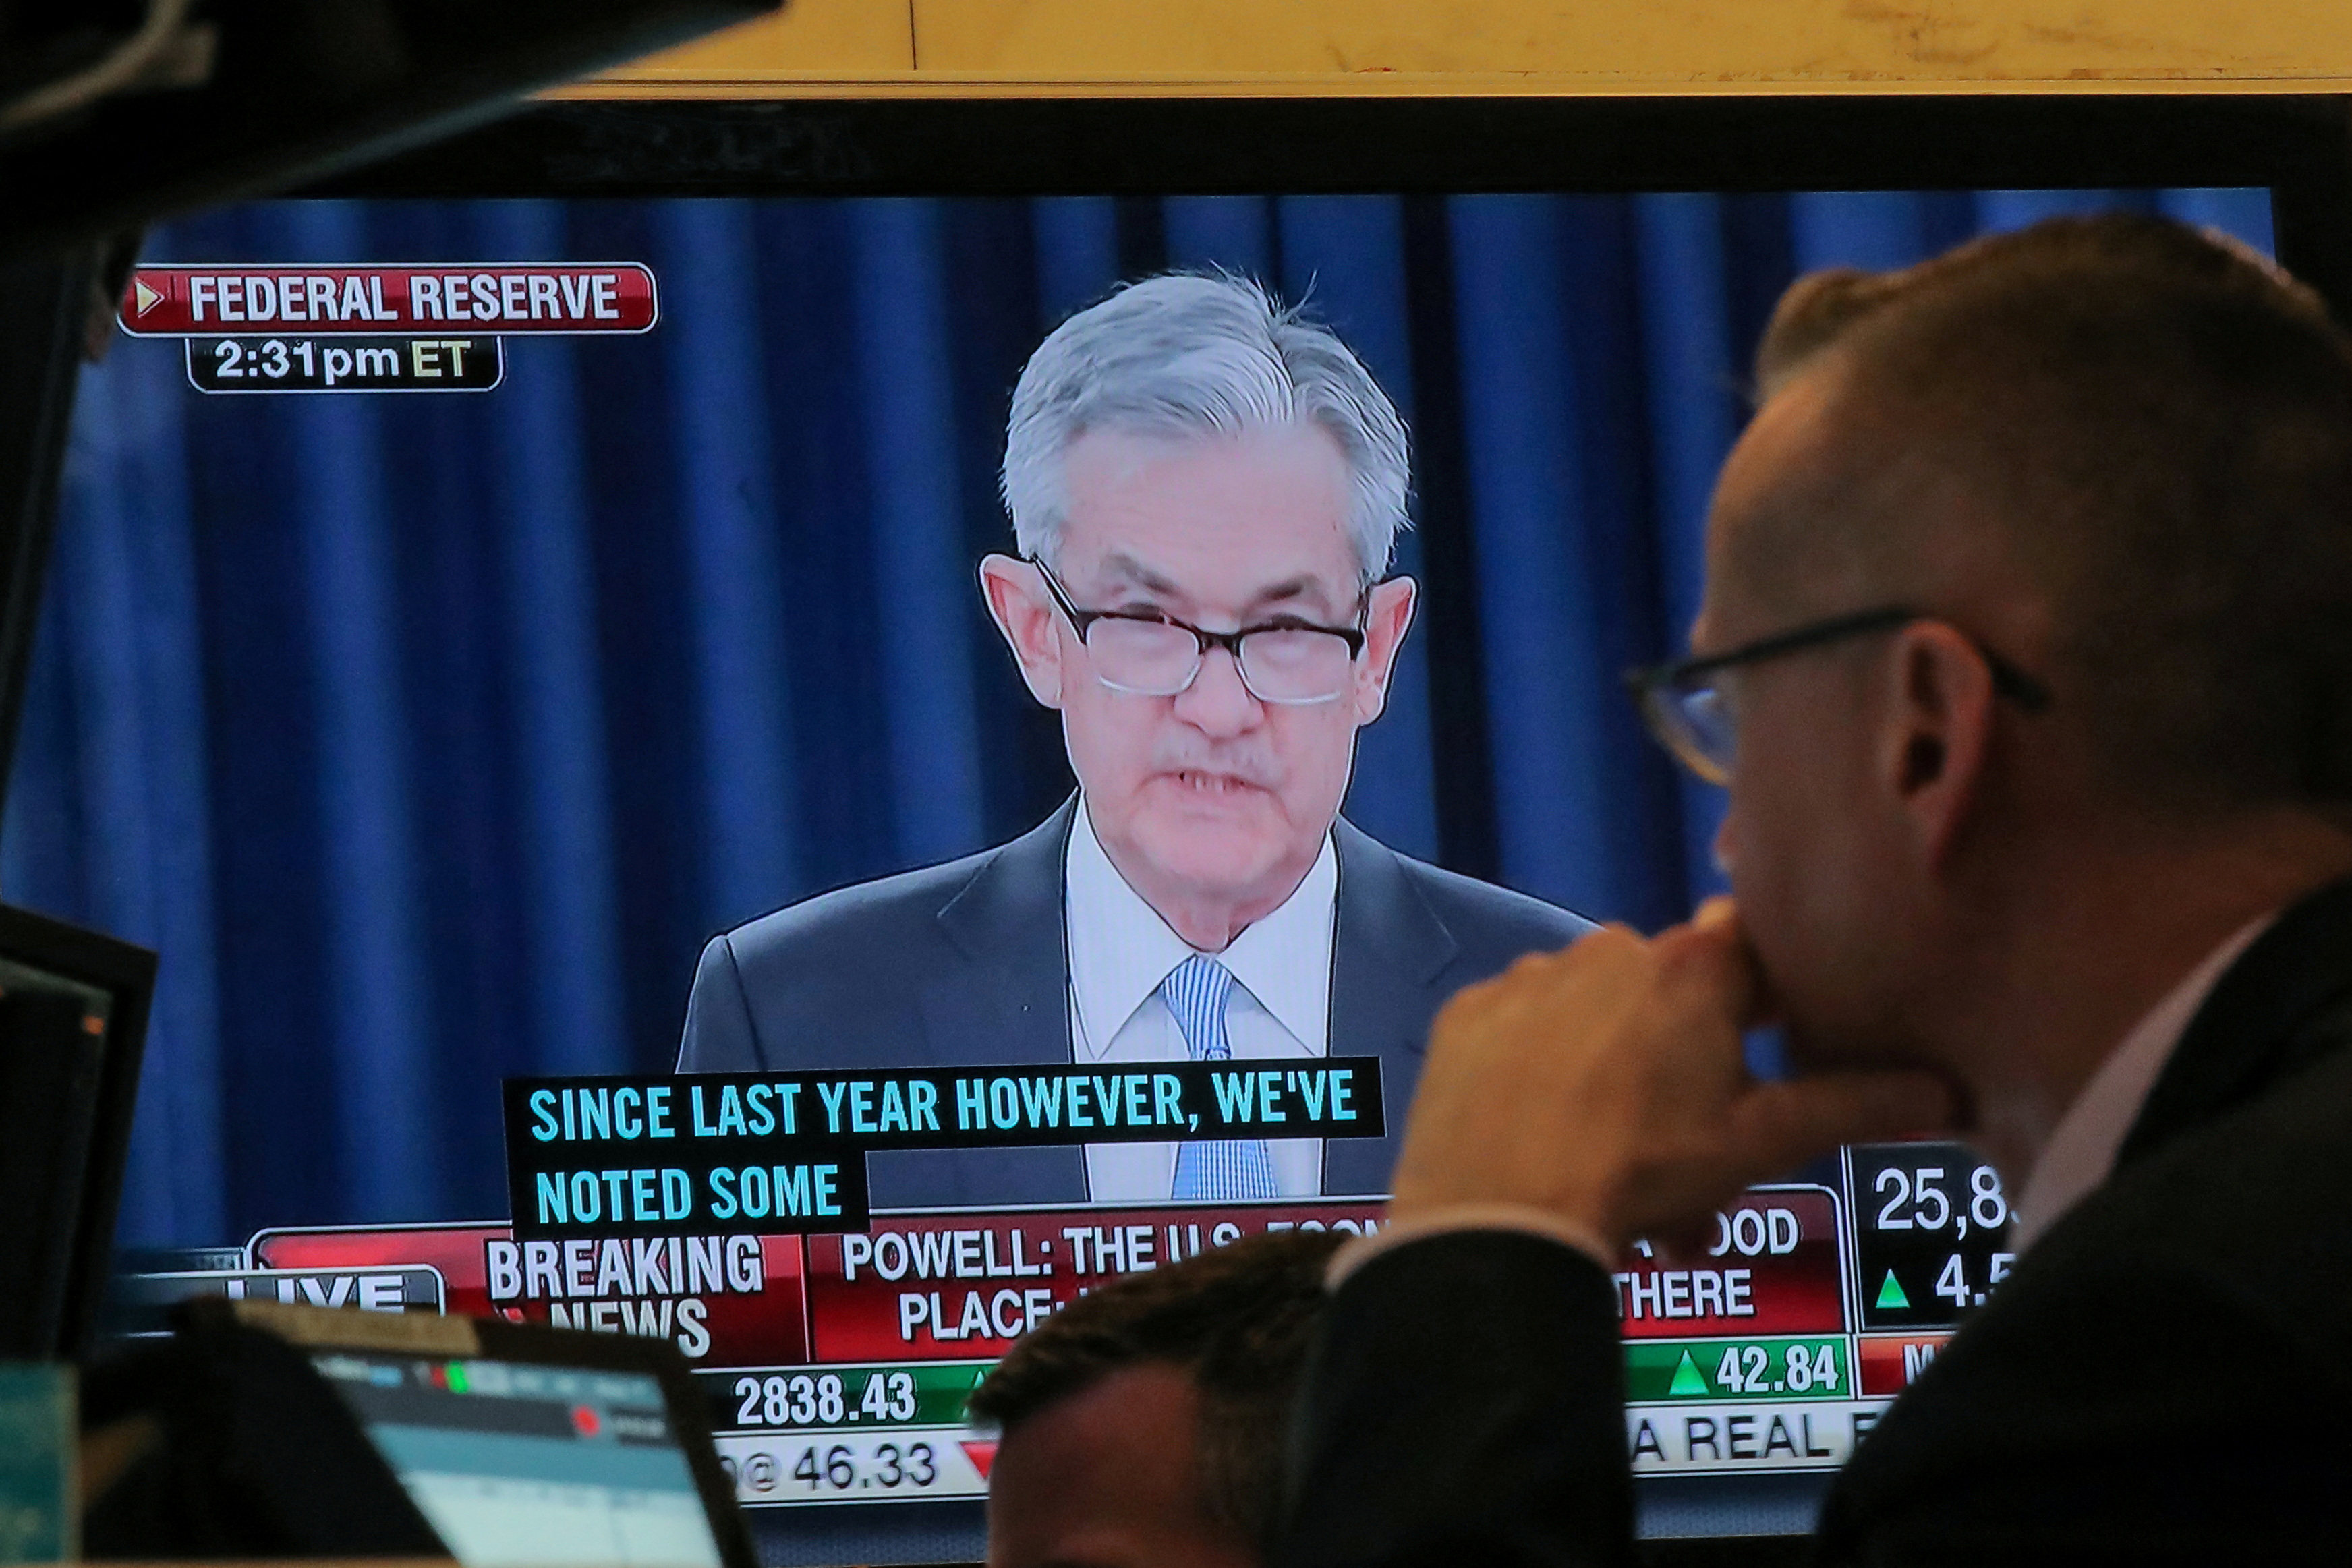 A trader watches US Federal Reserve chairman Jerome Powell on a screen at the New York Stock Exchange. International investors are following the Fed’s lead and selling off US government debt, suggesting ebbing investor confidence as the US Congress is at an impasse over the debt ceiling. Photo: Reuters